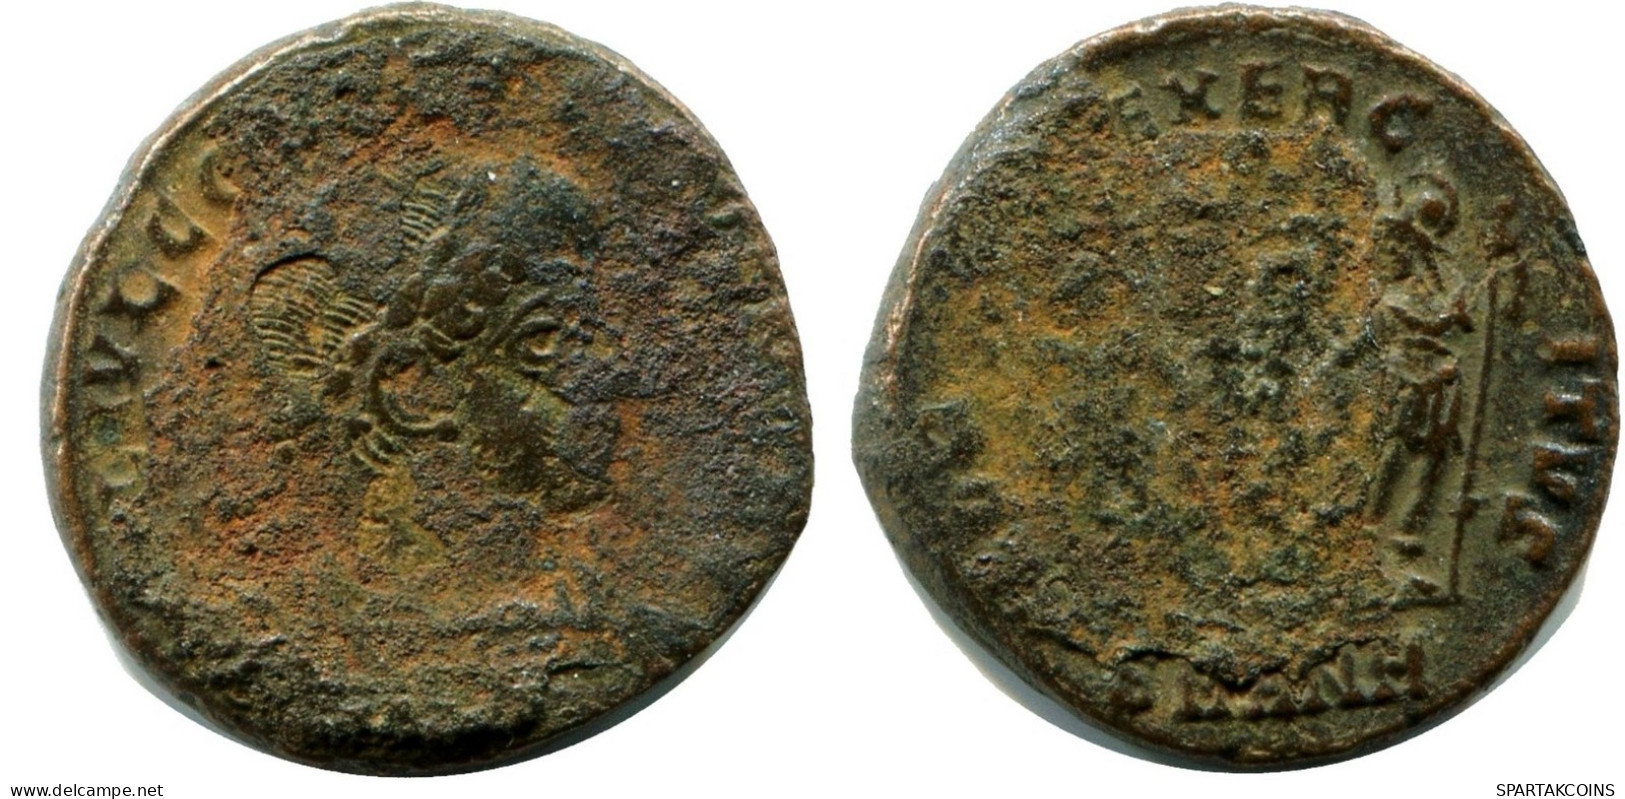 CONSTANS MINTED IN ANTIOCH FOUND IN IHNASYAH HOARD EGYPT #ANC11835.14.E.A - El Imperio Christiano (307 / 363)